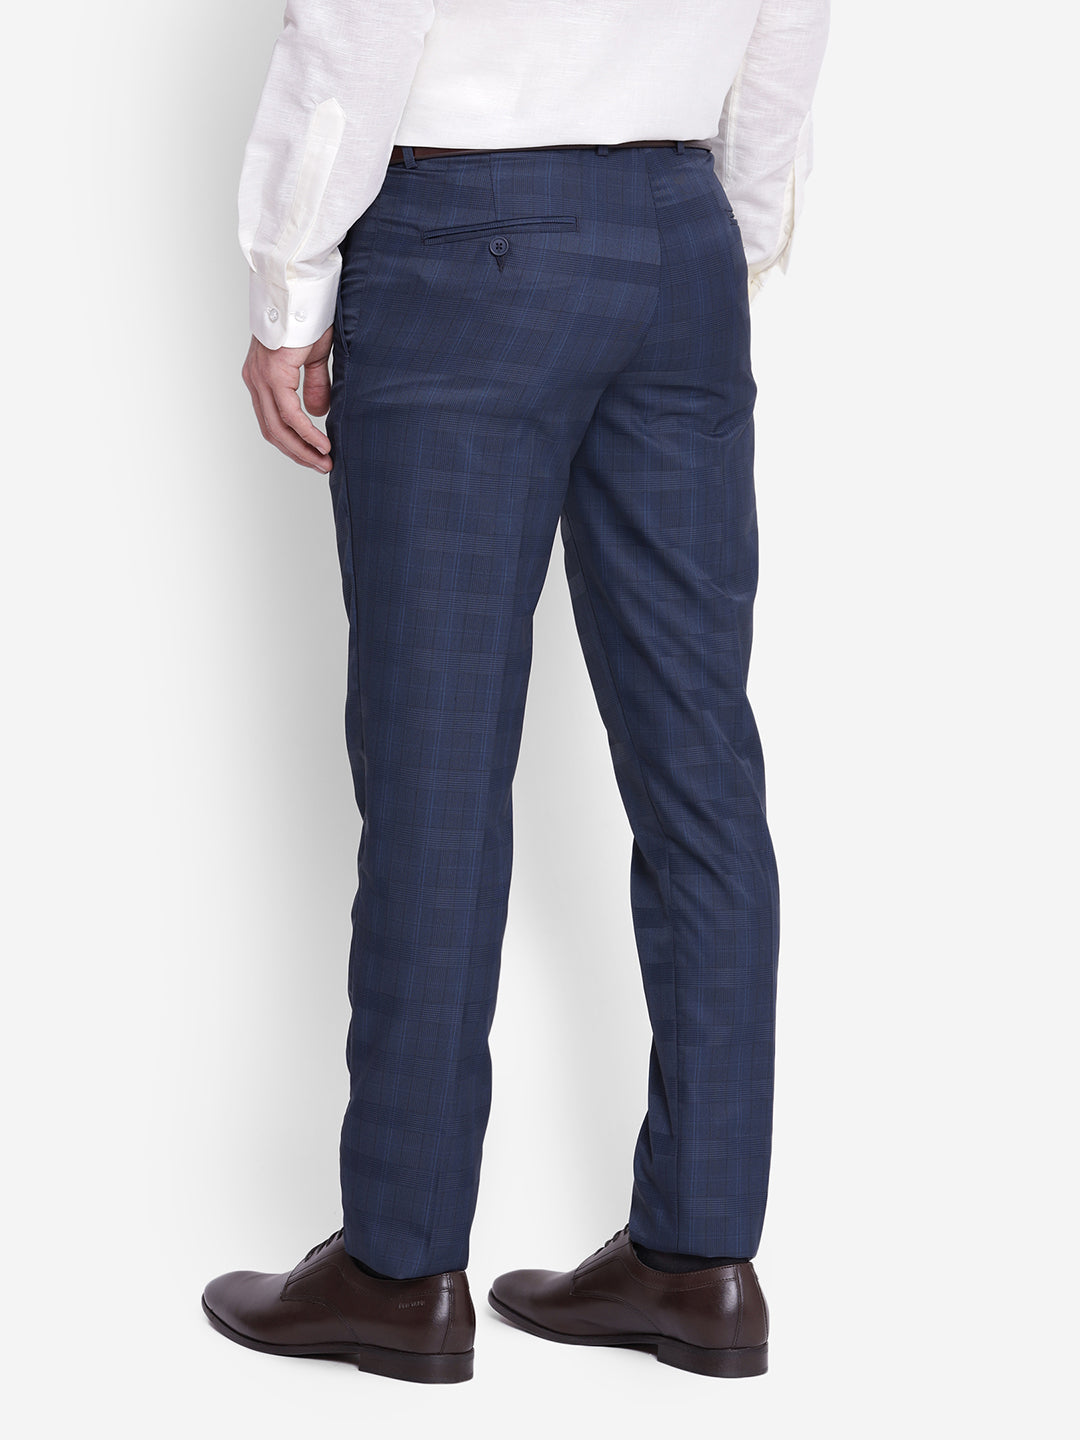 Checked Navy Blue Slim Fit Formal Trouser